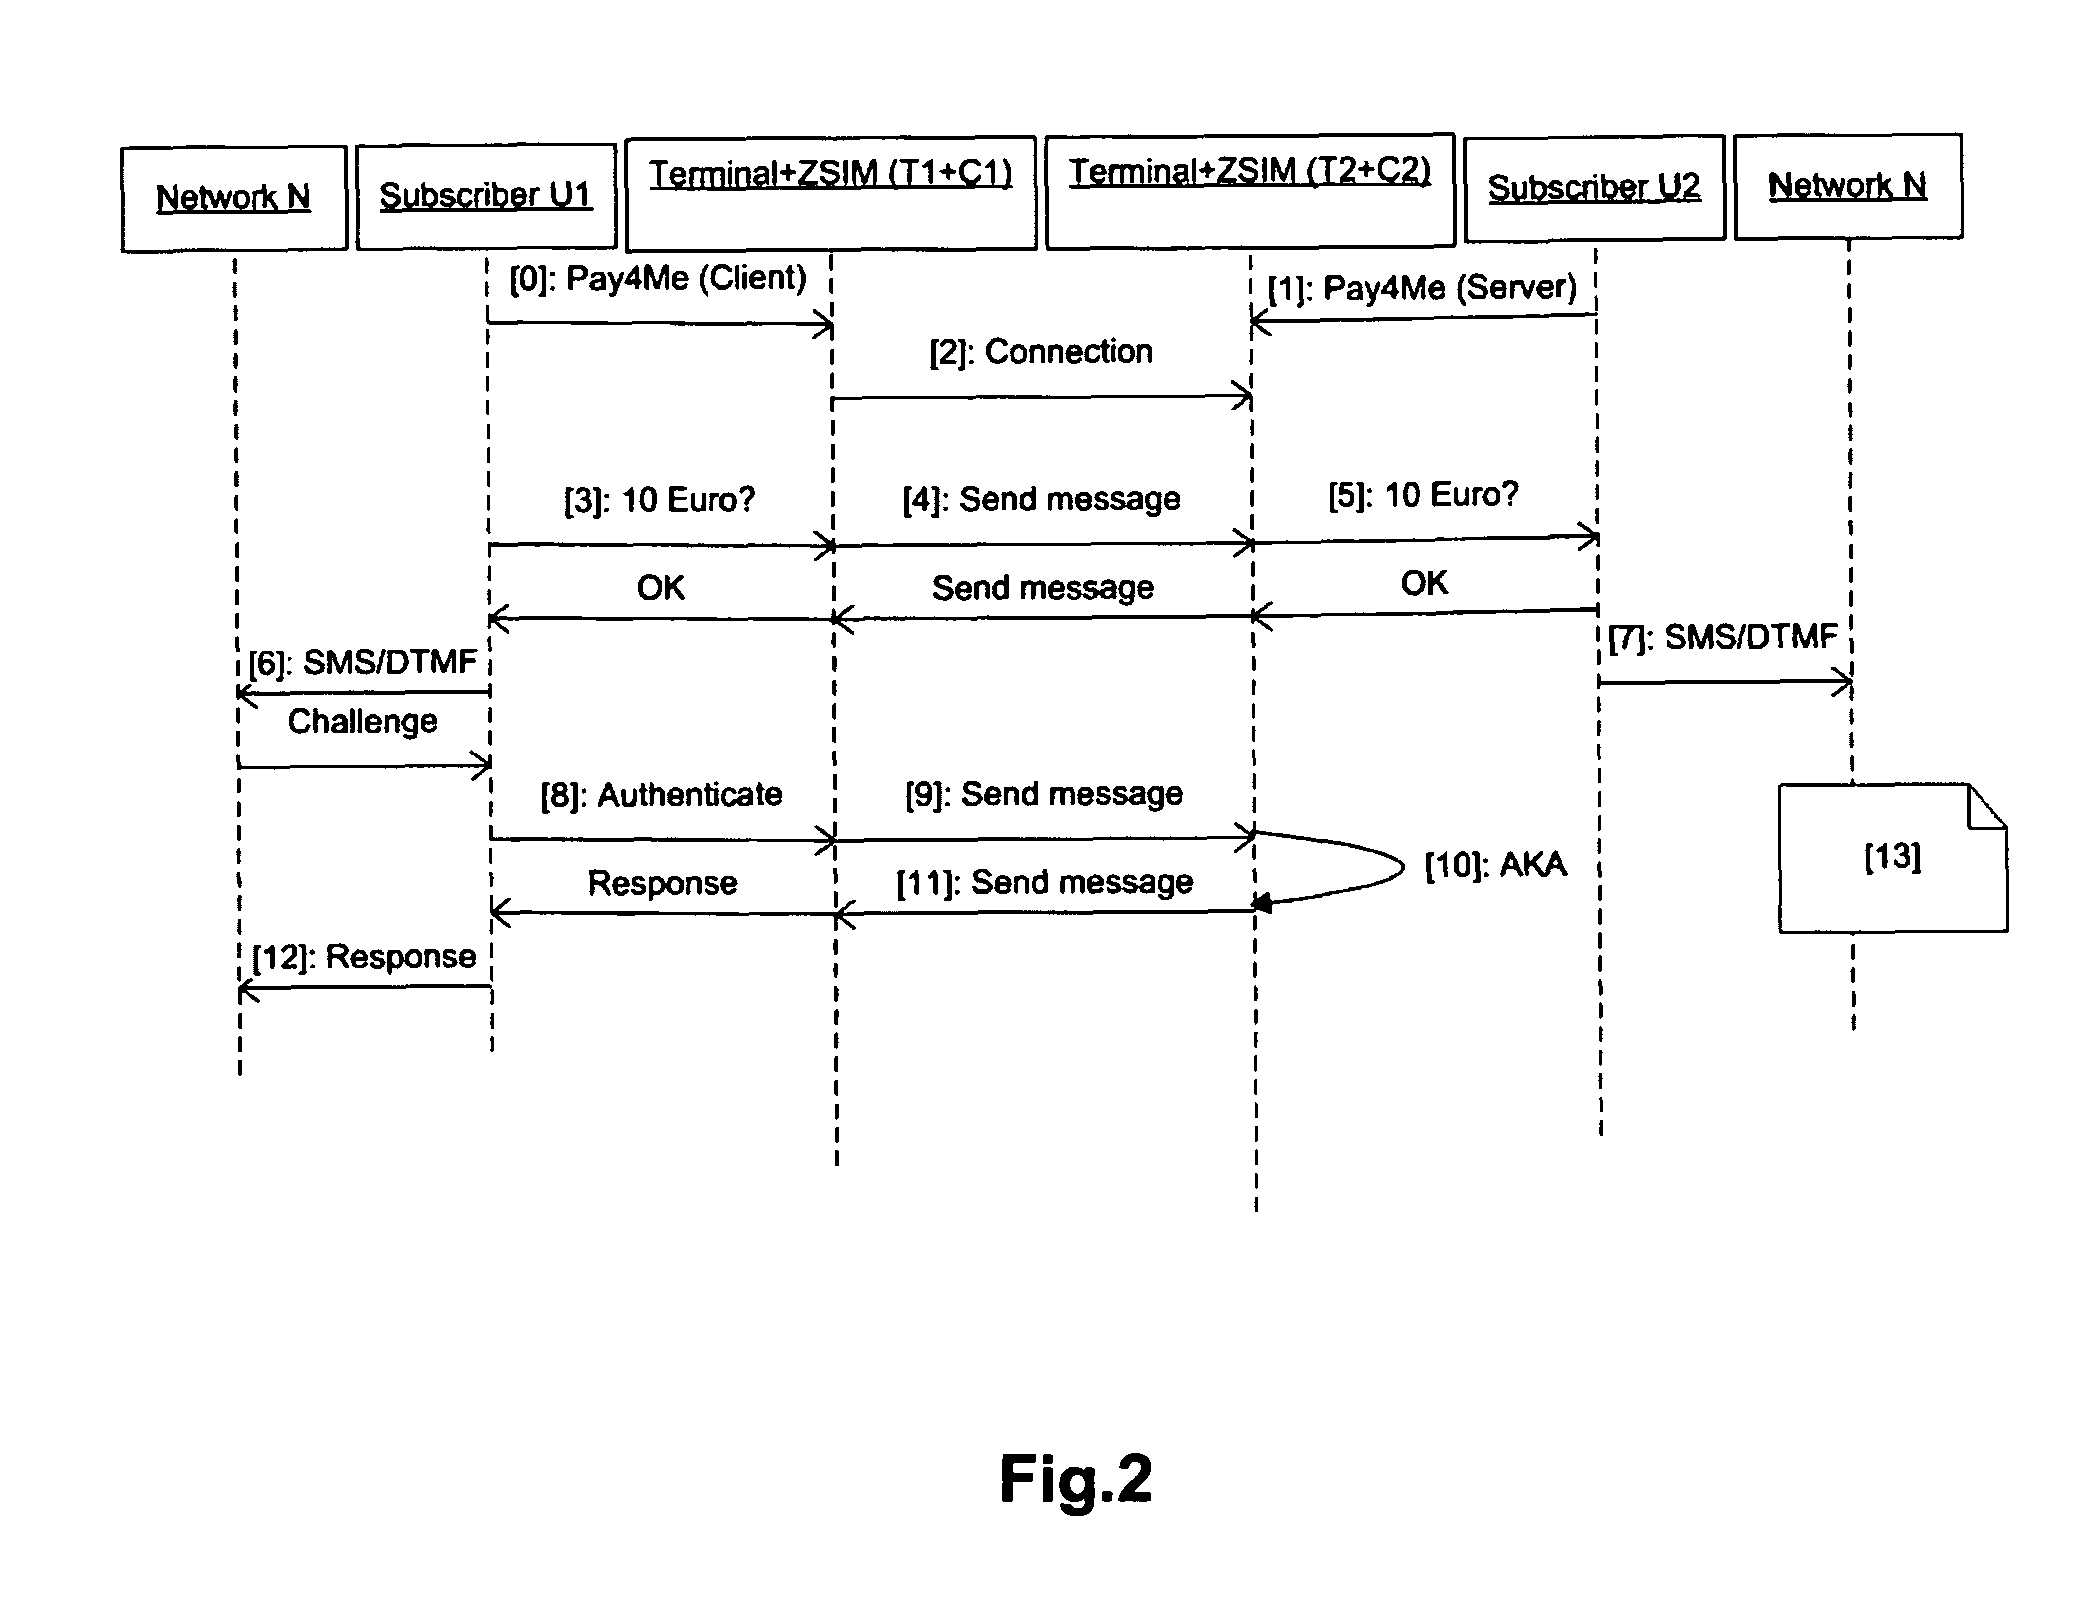 Method and subscriber identification card for using a service through a mobile telephone terminal using resources of another mobile telephone terminal